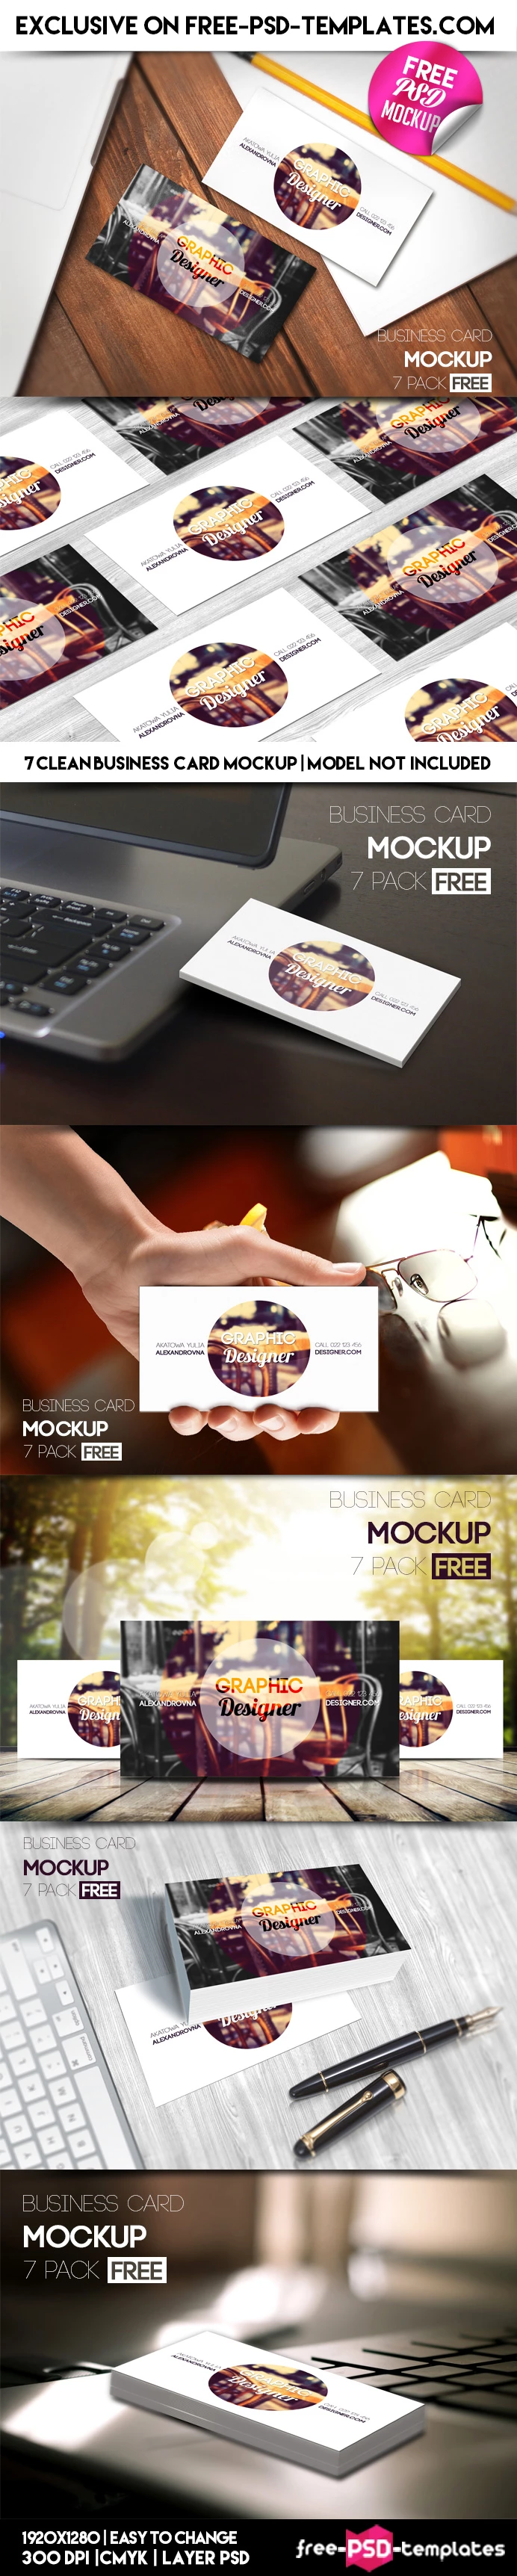 Preview_Business_Card_FREE_MOCKUP